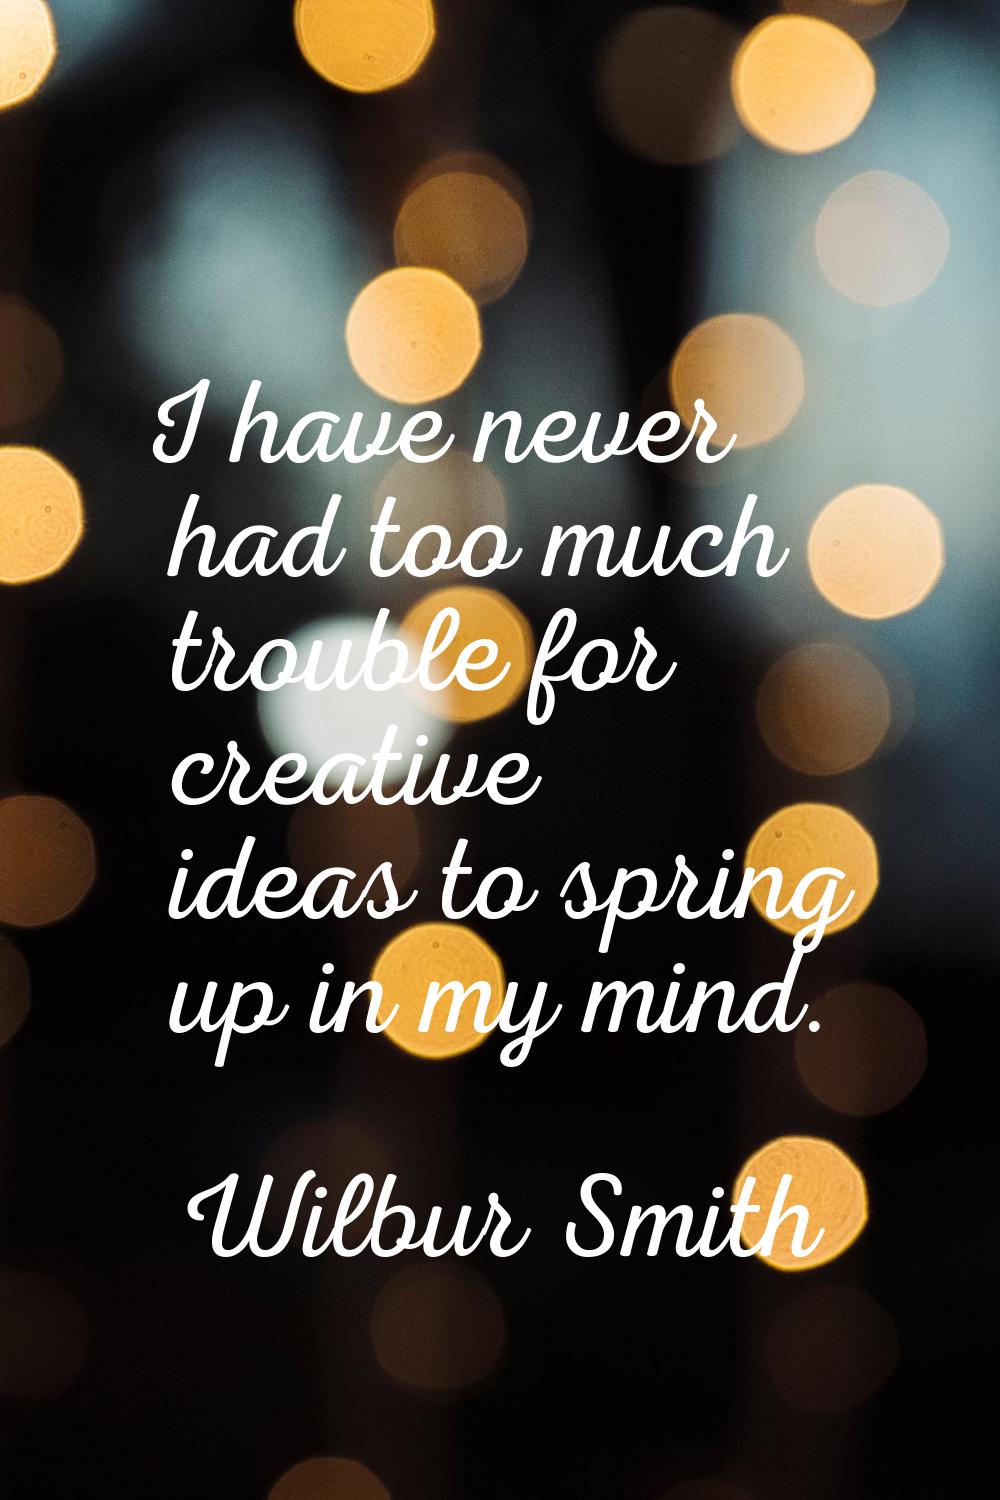 I have never had too much trouble for creative ideas to spring up in my mind.